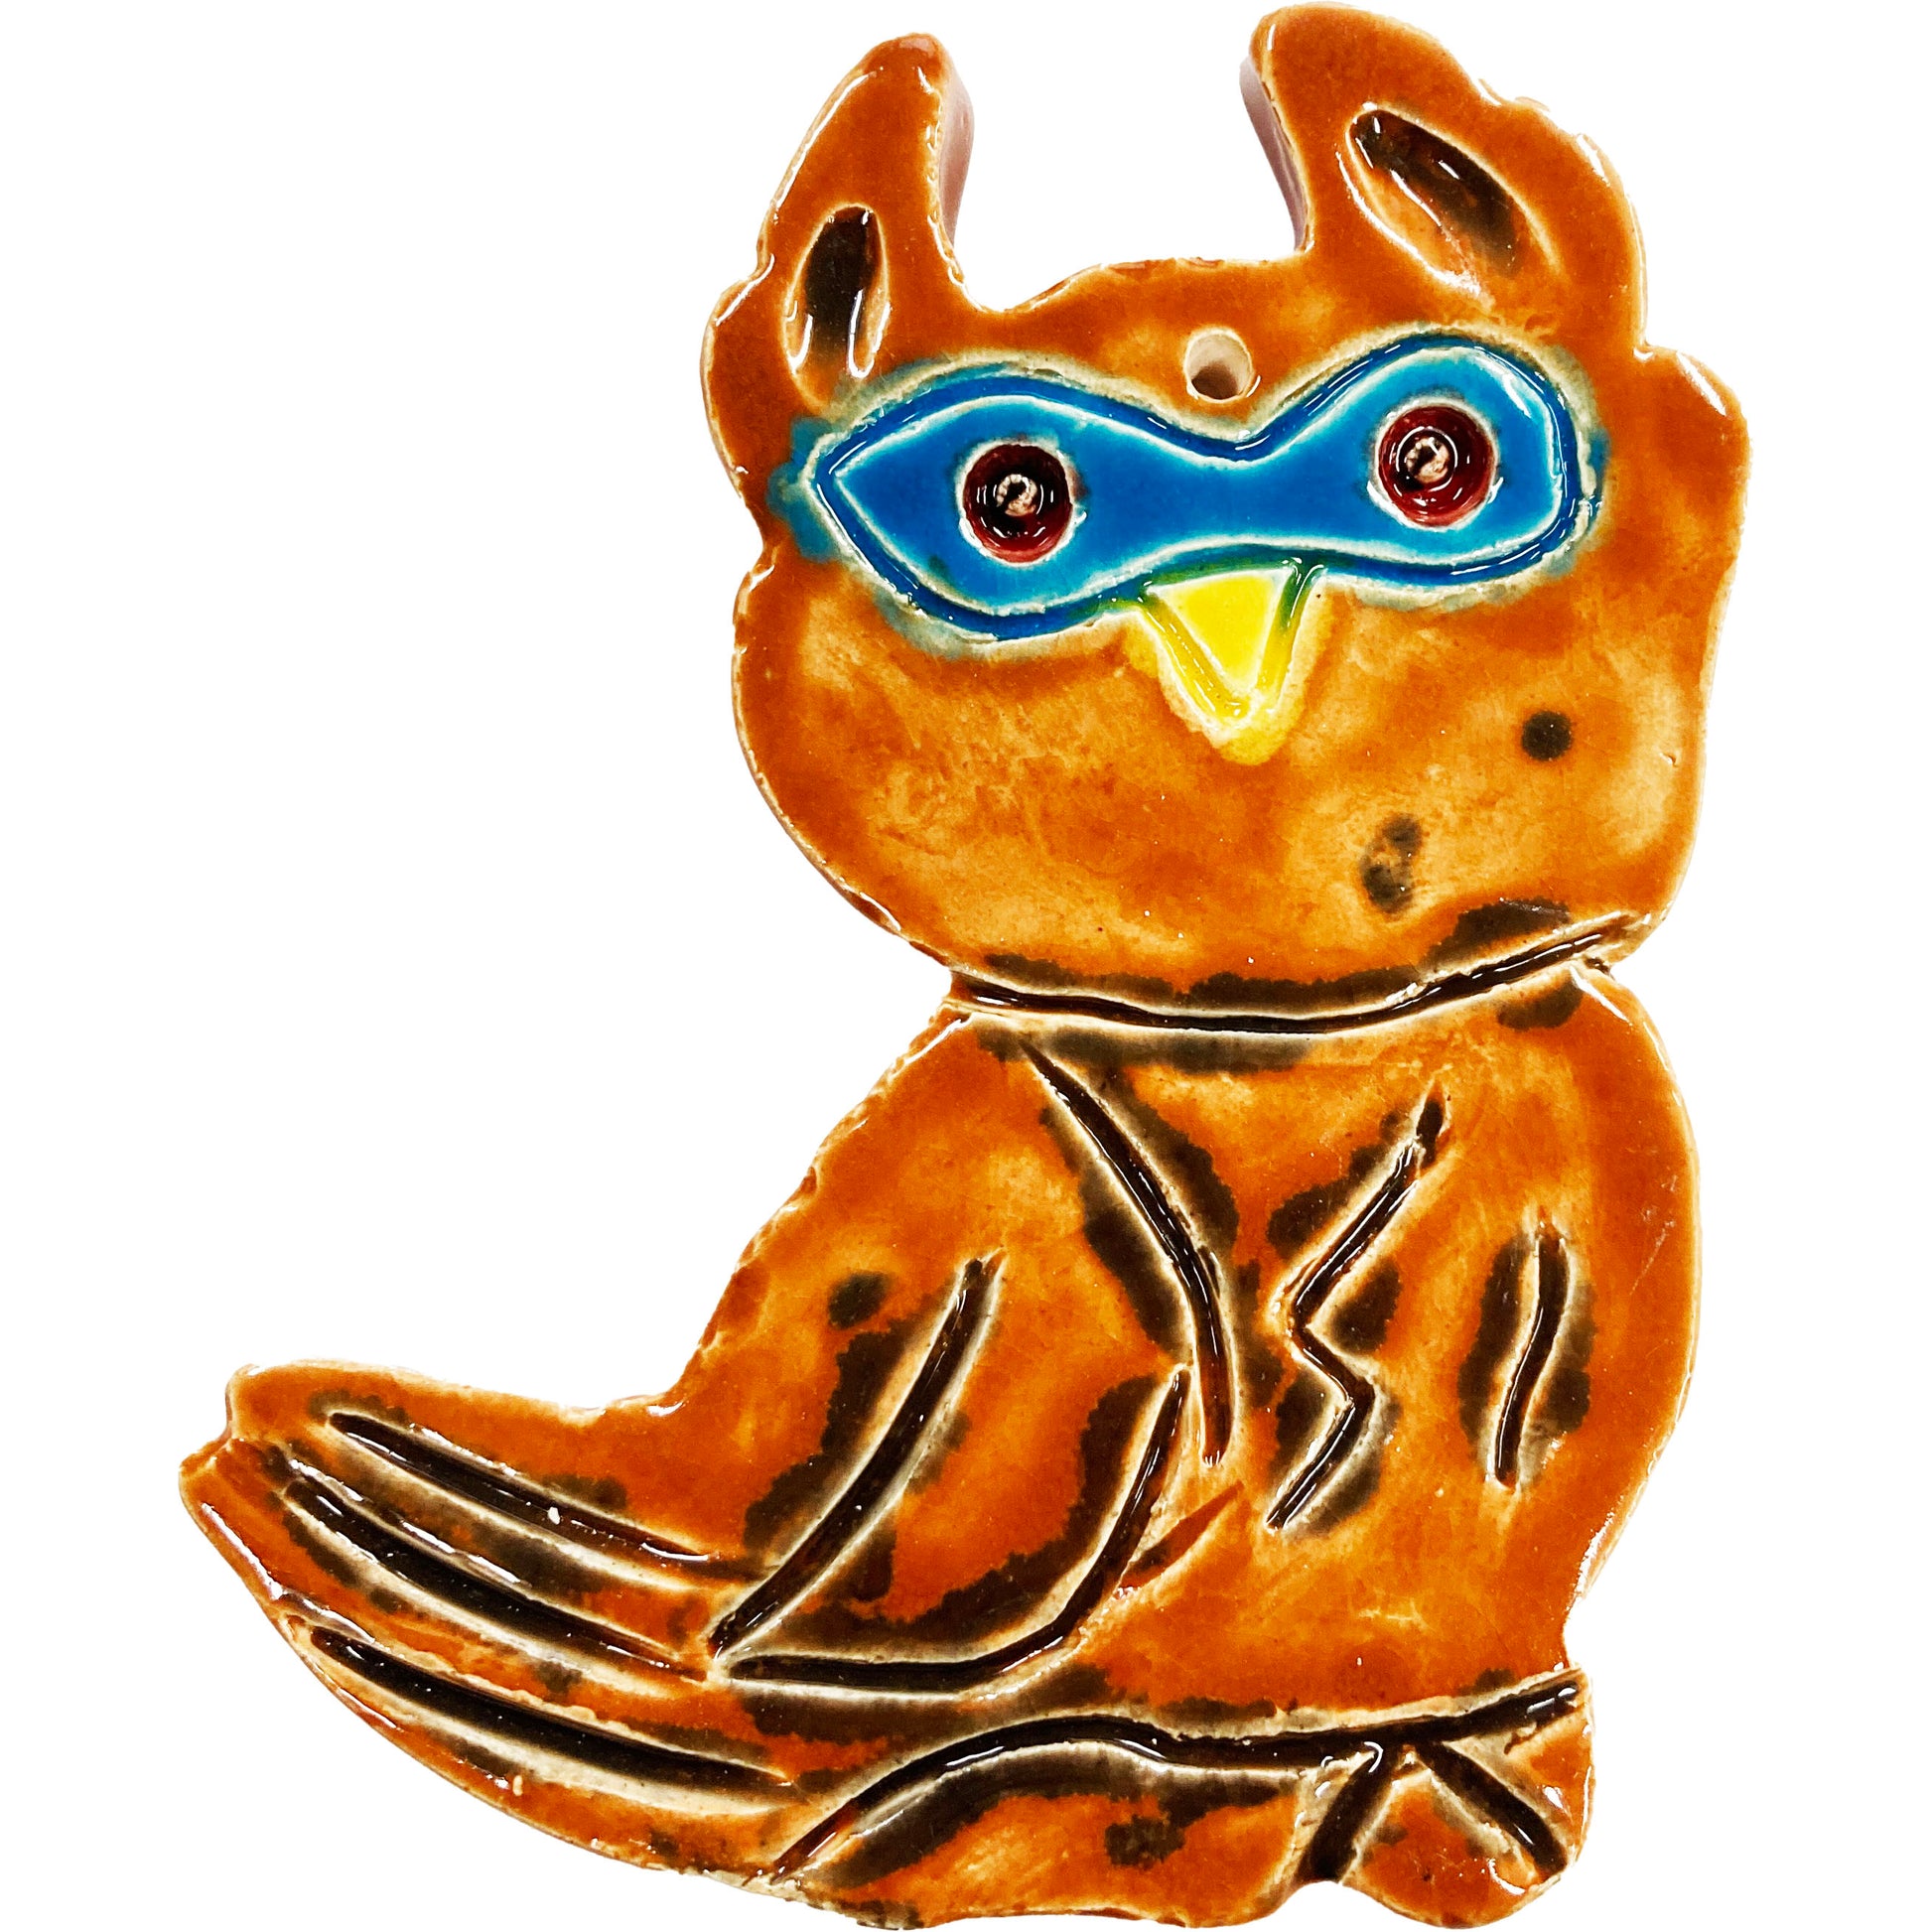 WATCH Resources Art Guild - Ceramic Arts Handmade Clay Crafts 5-inch x 4-inch Glazed Owl made by Jim Wilbanks